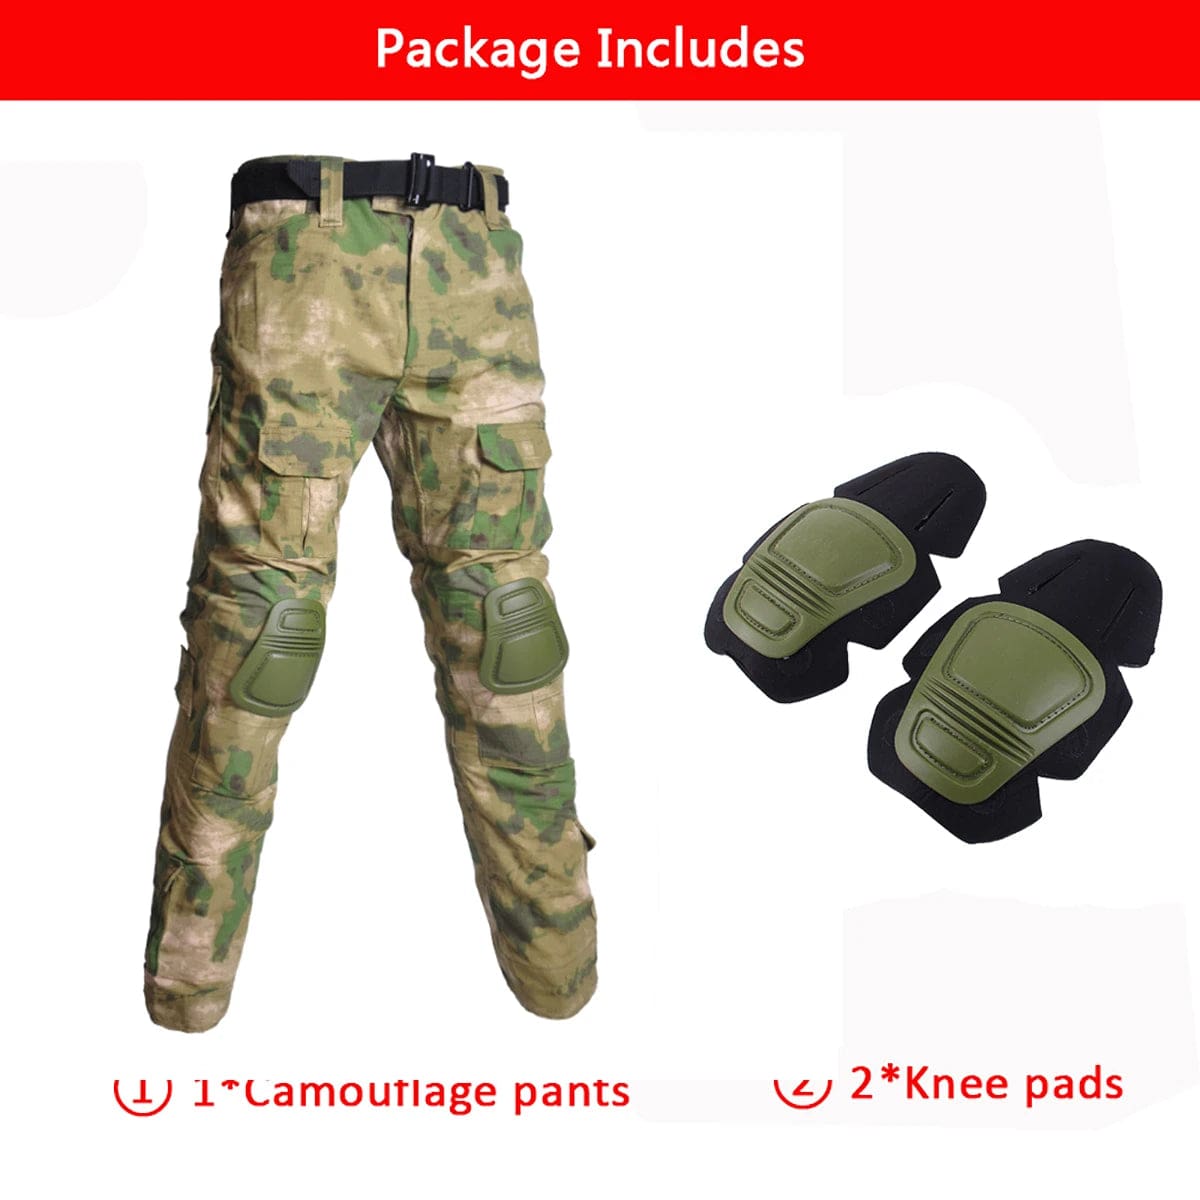 ACTION AIRSOFT ruin green / S(50-60kg) Airsoft Uniform Tactical Suits Army Camouflage Pants Military Clothing Hunting Clothes Paintball Suits Combat Shirt Pants +Pads